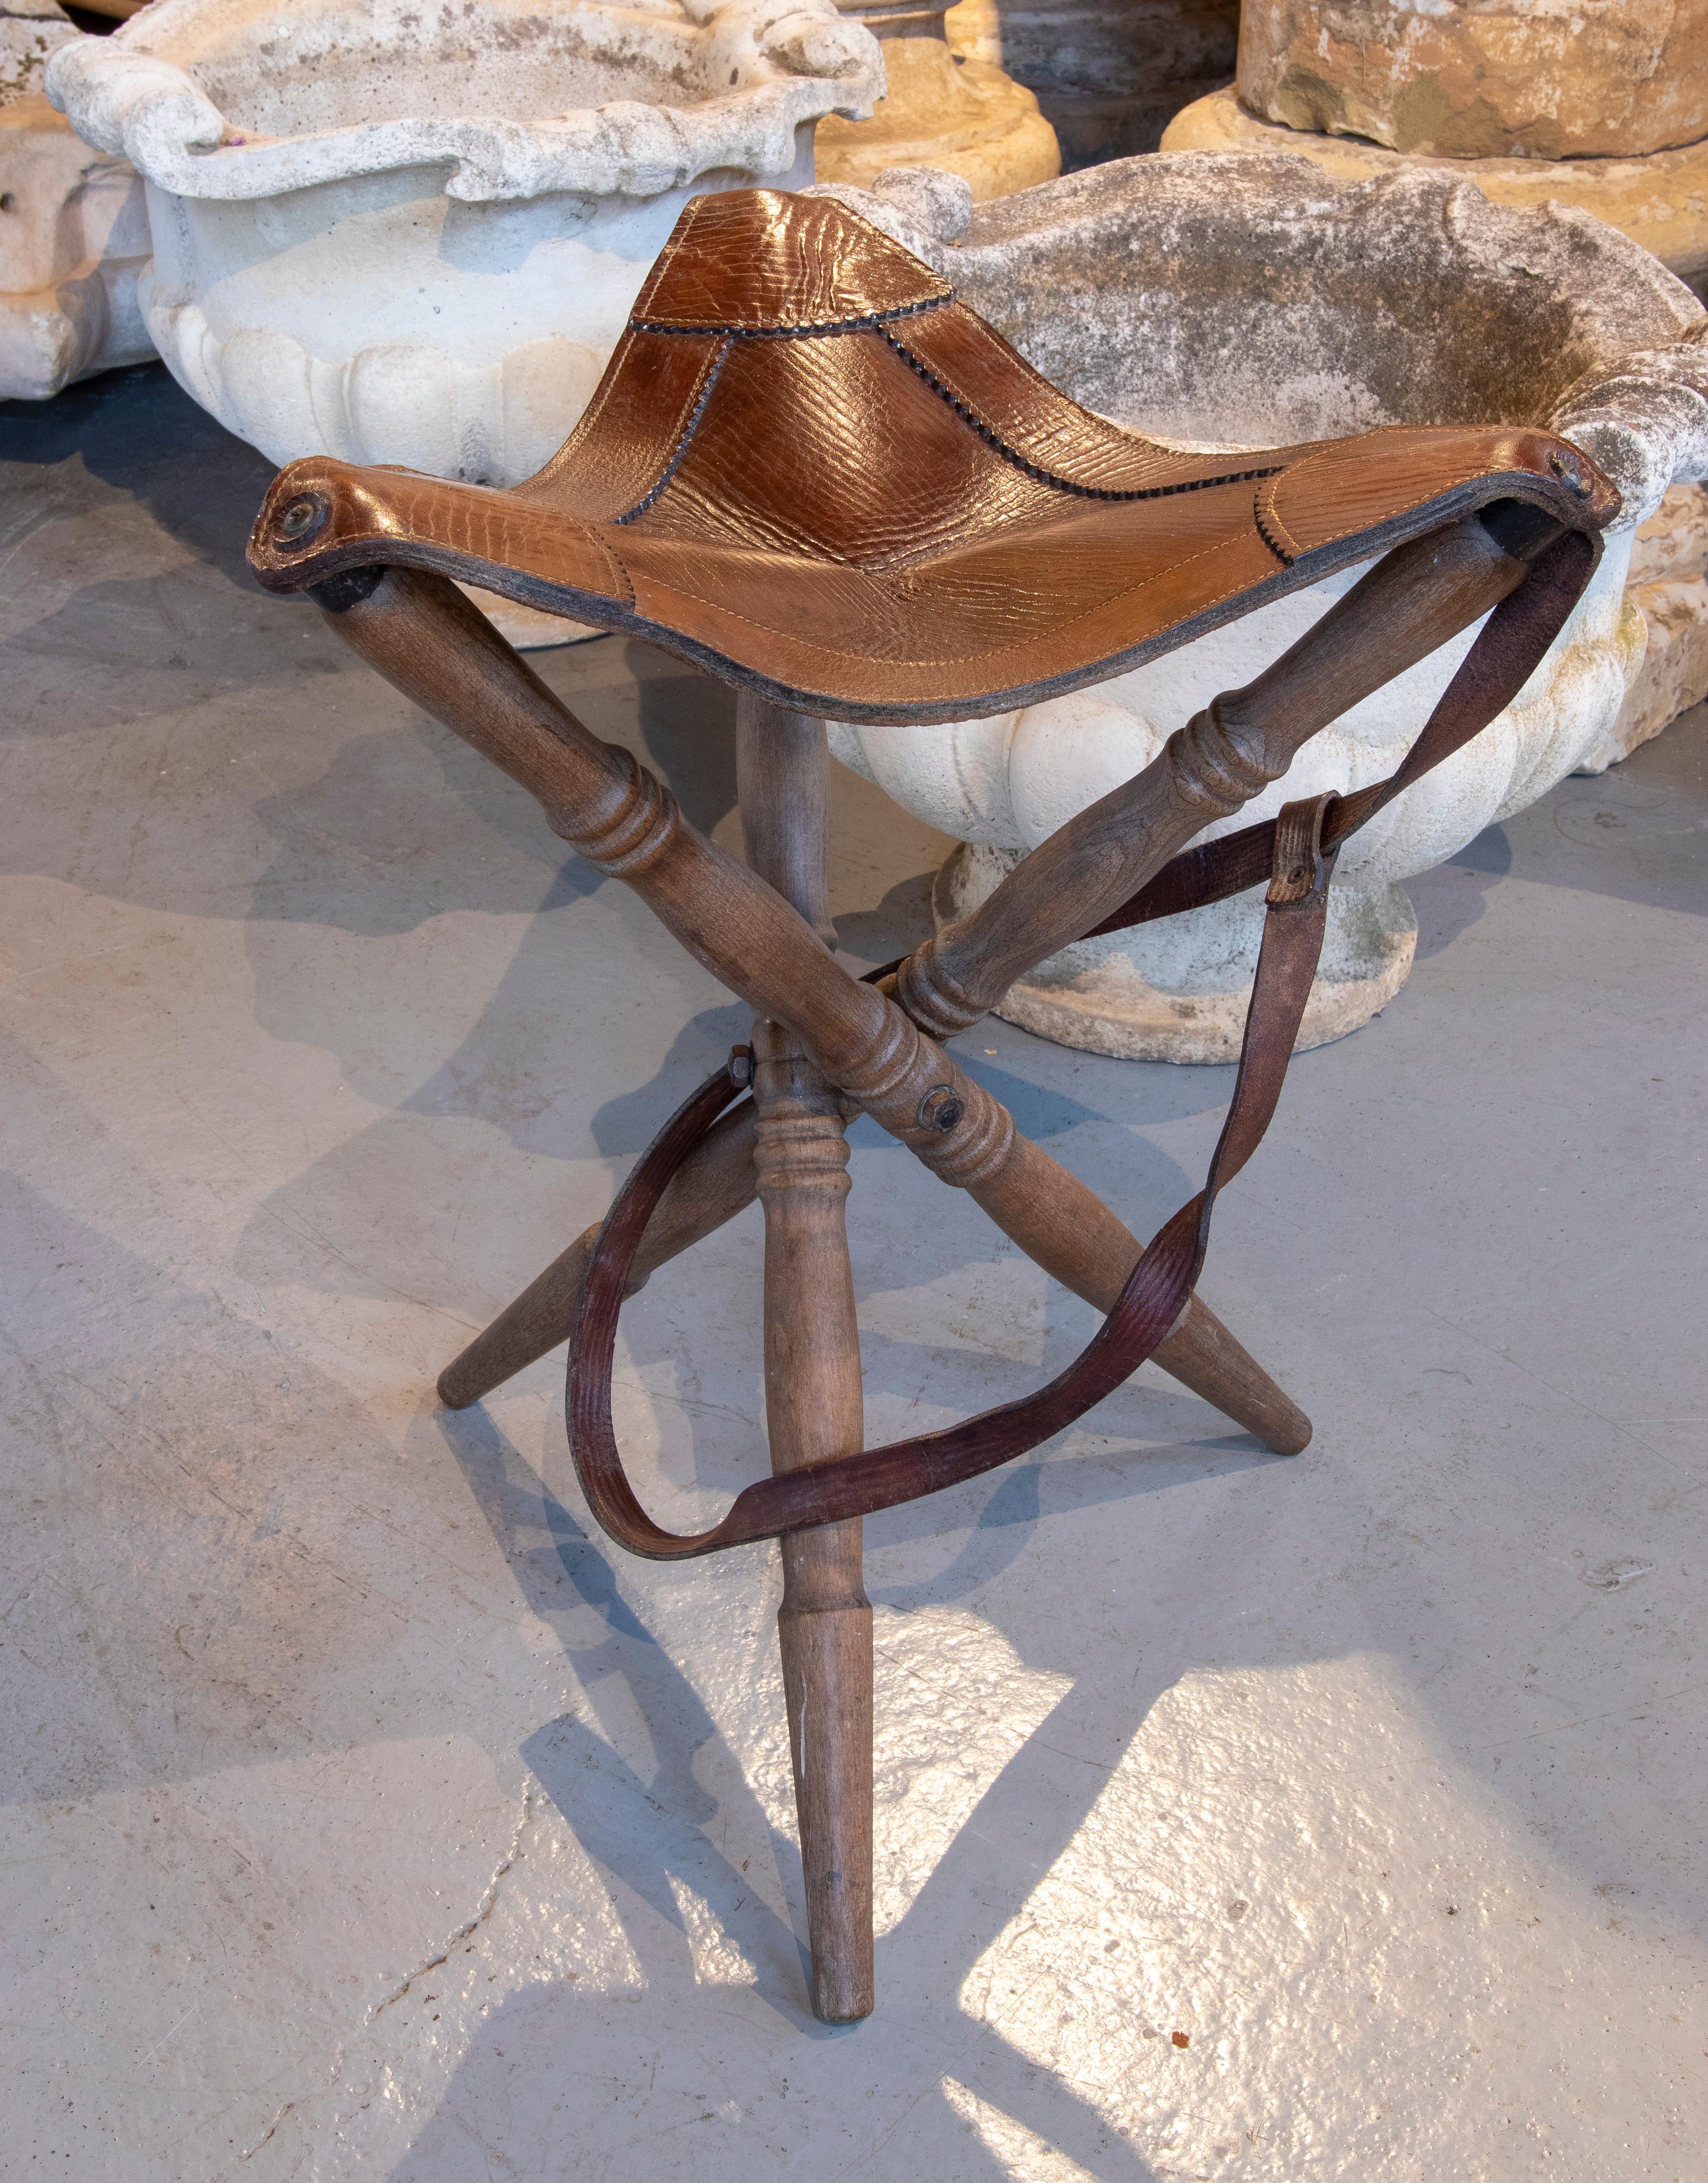 Spanish folding stool with wooden legs and leather seat.